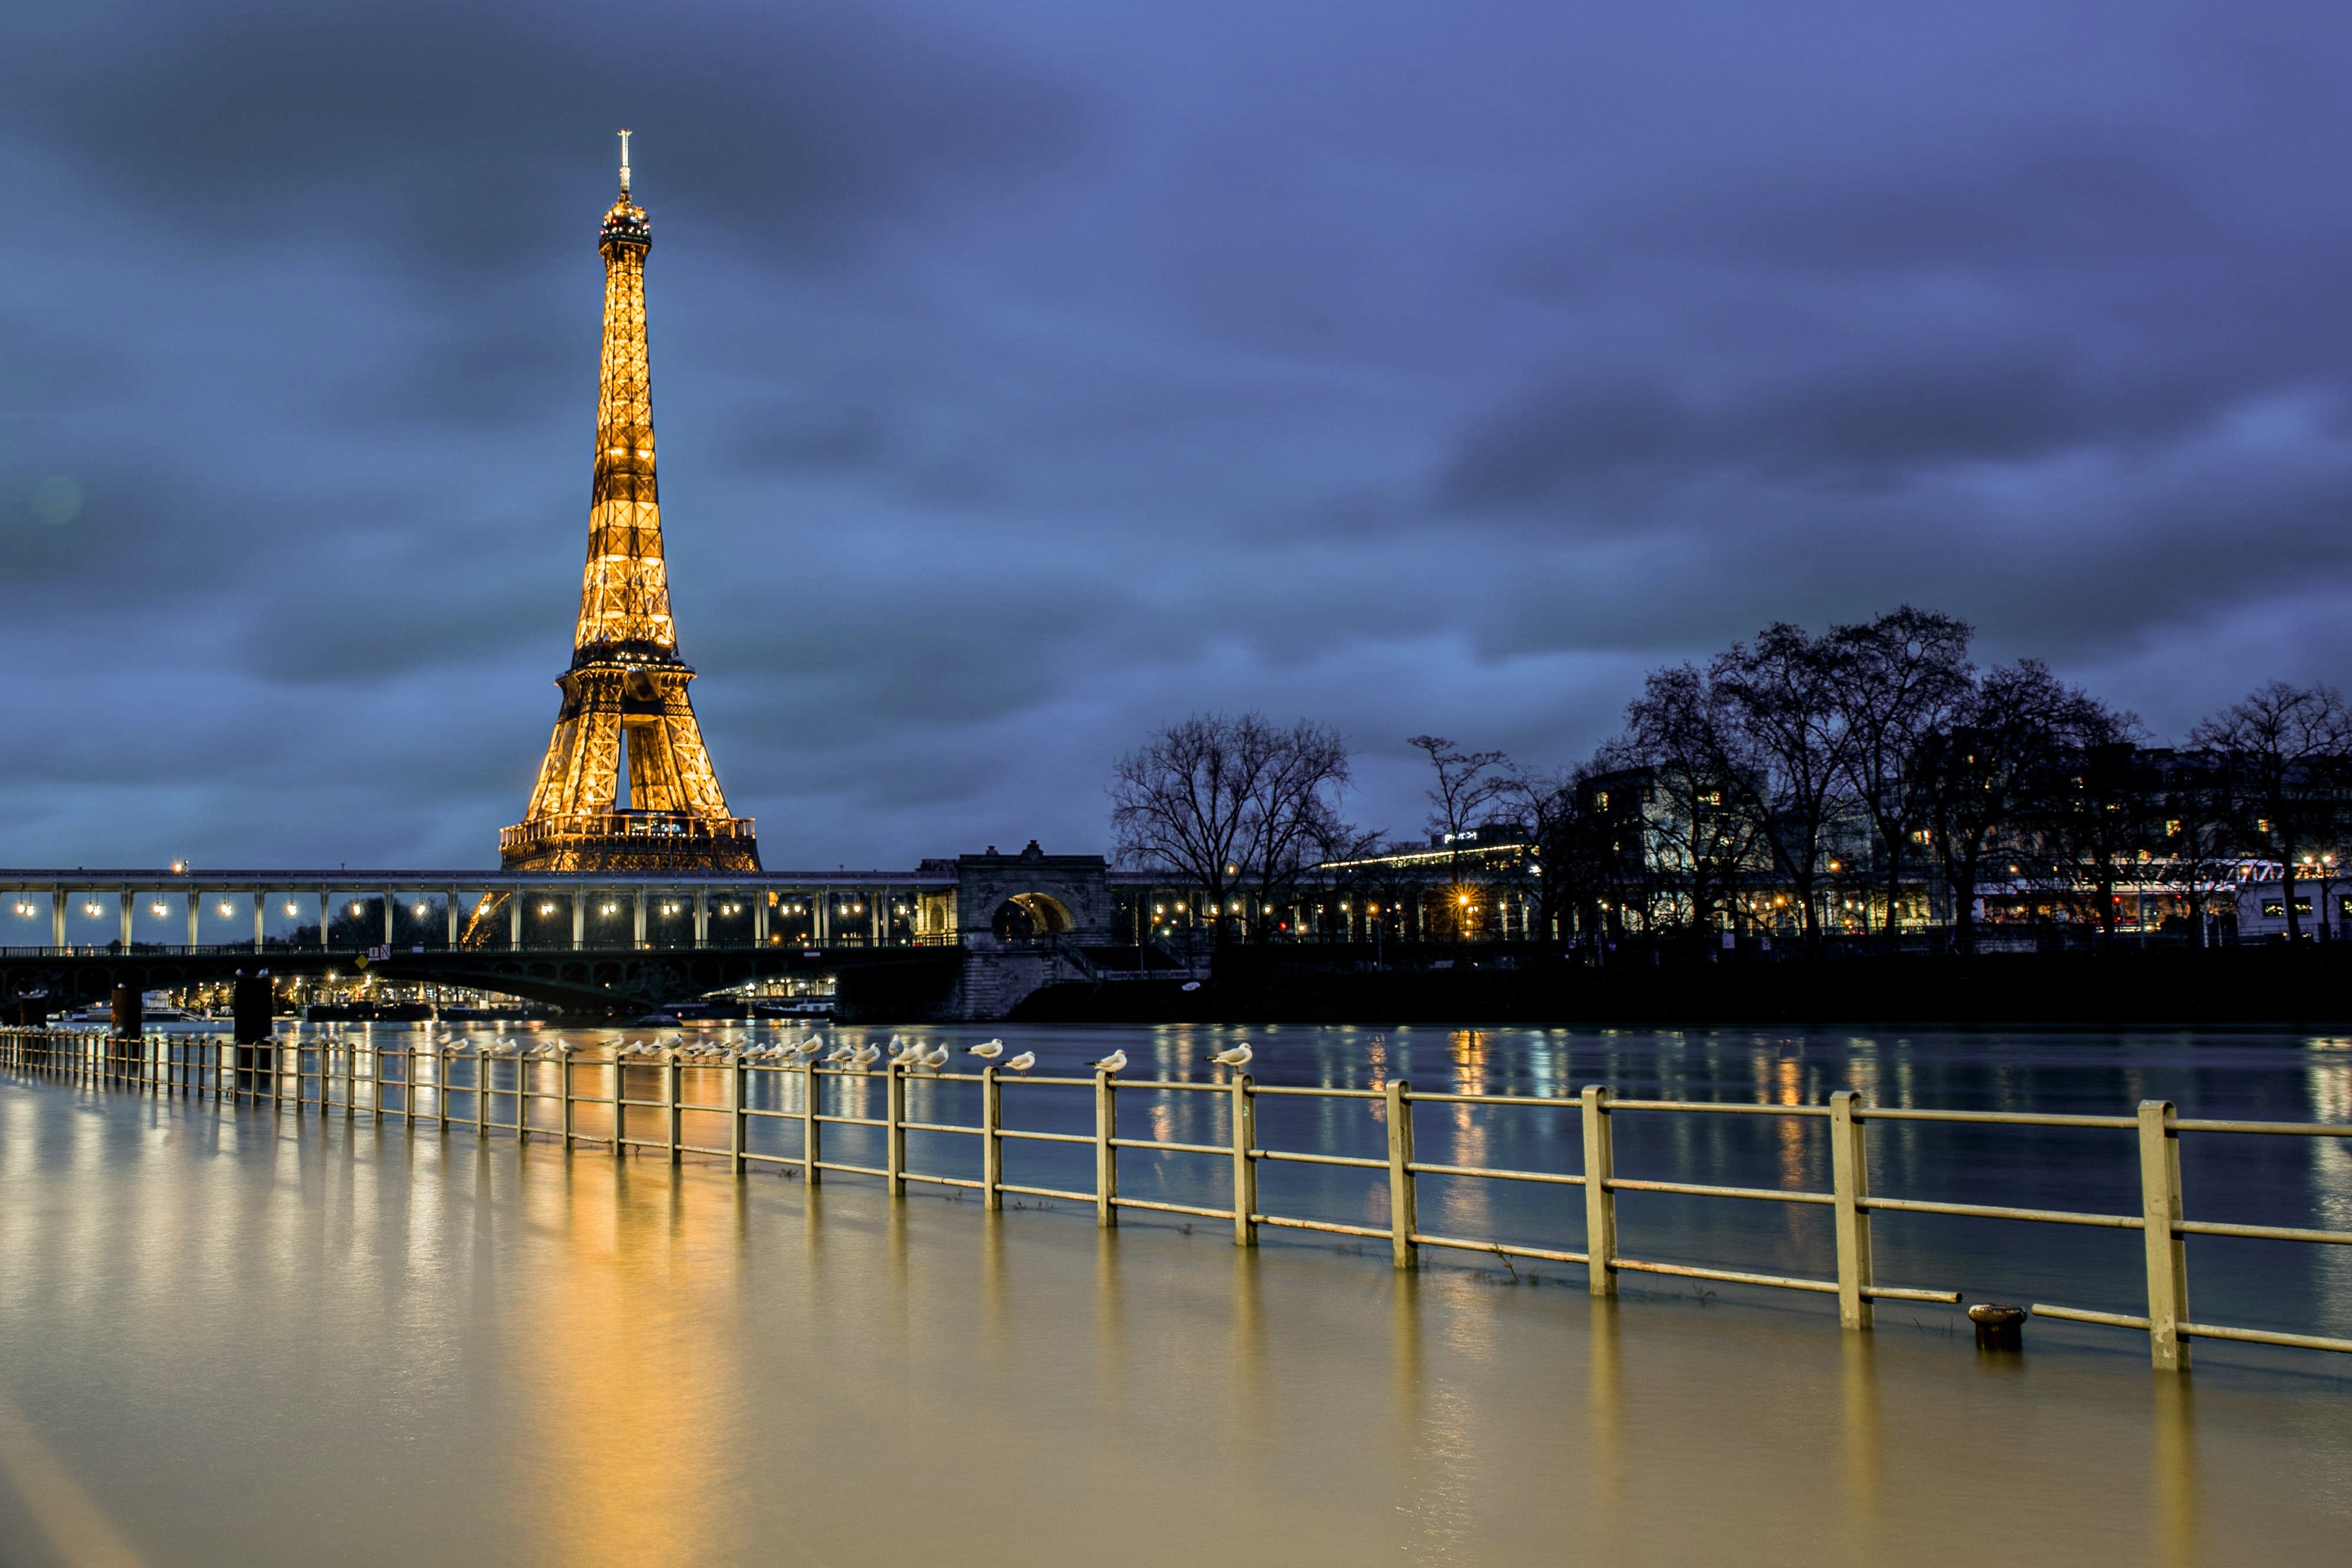 Jared rewarded Madison a trip to Paris with her family. | Source: Unsplash